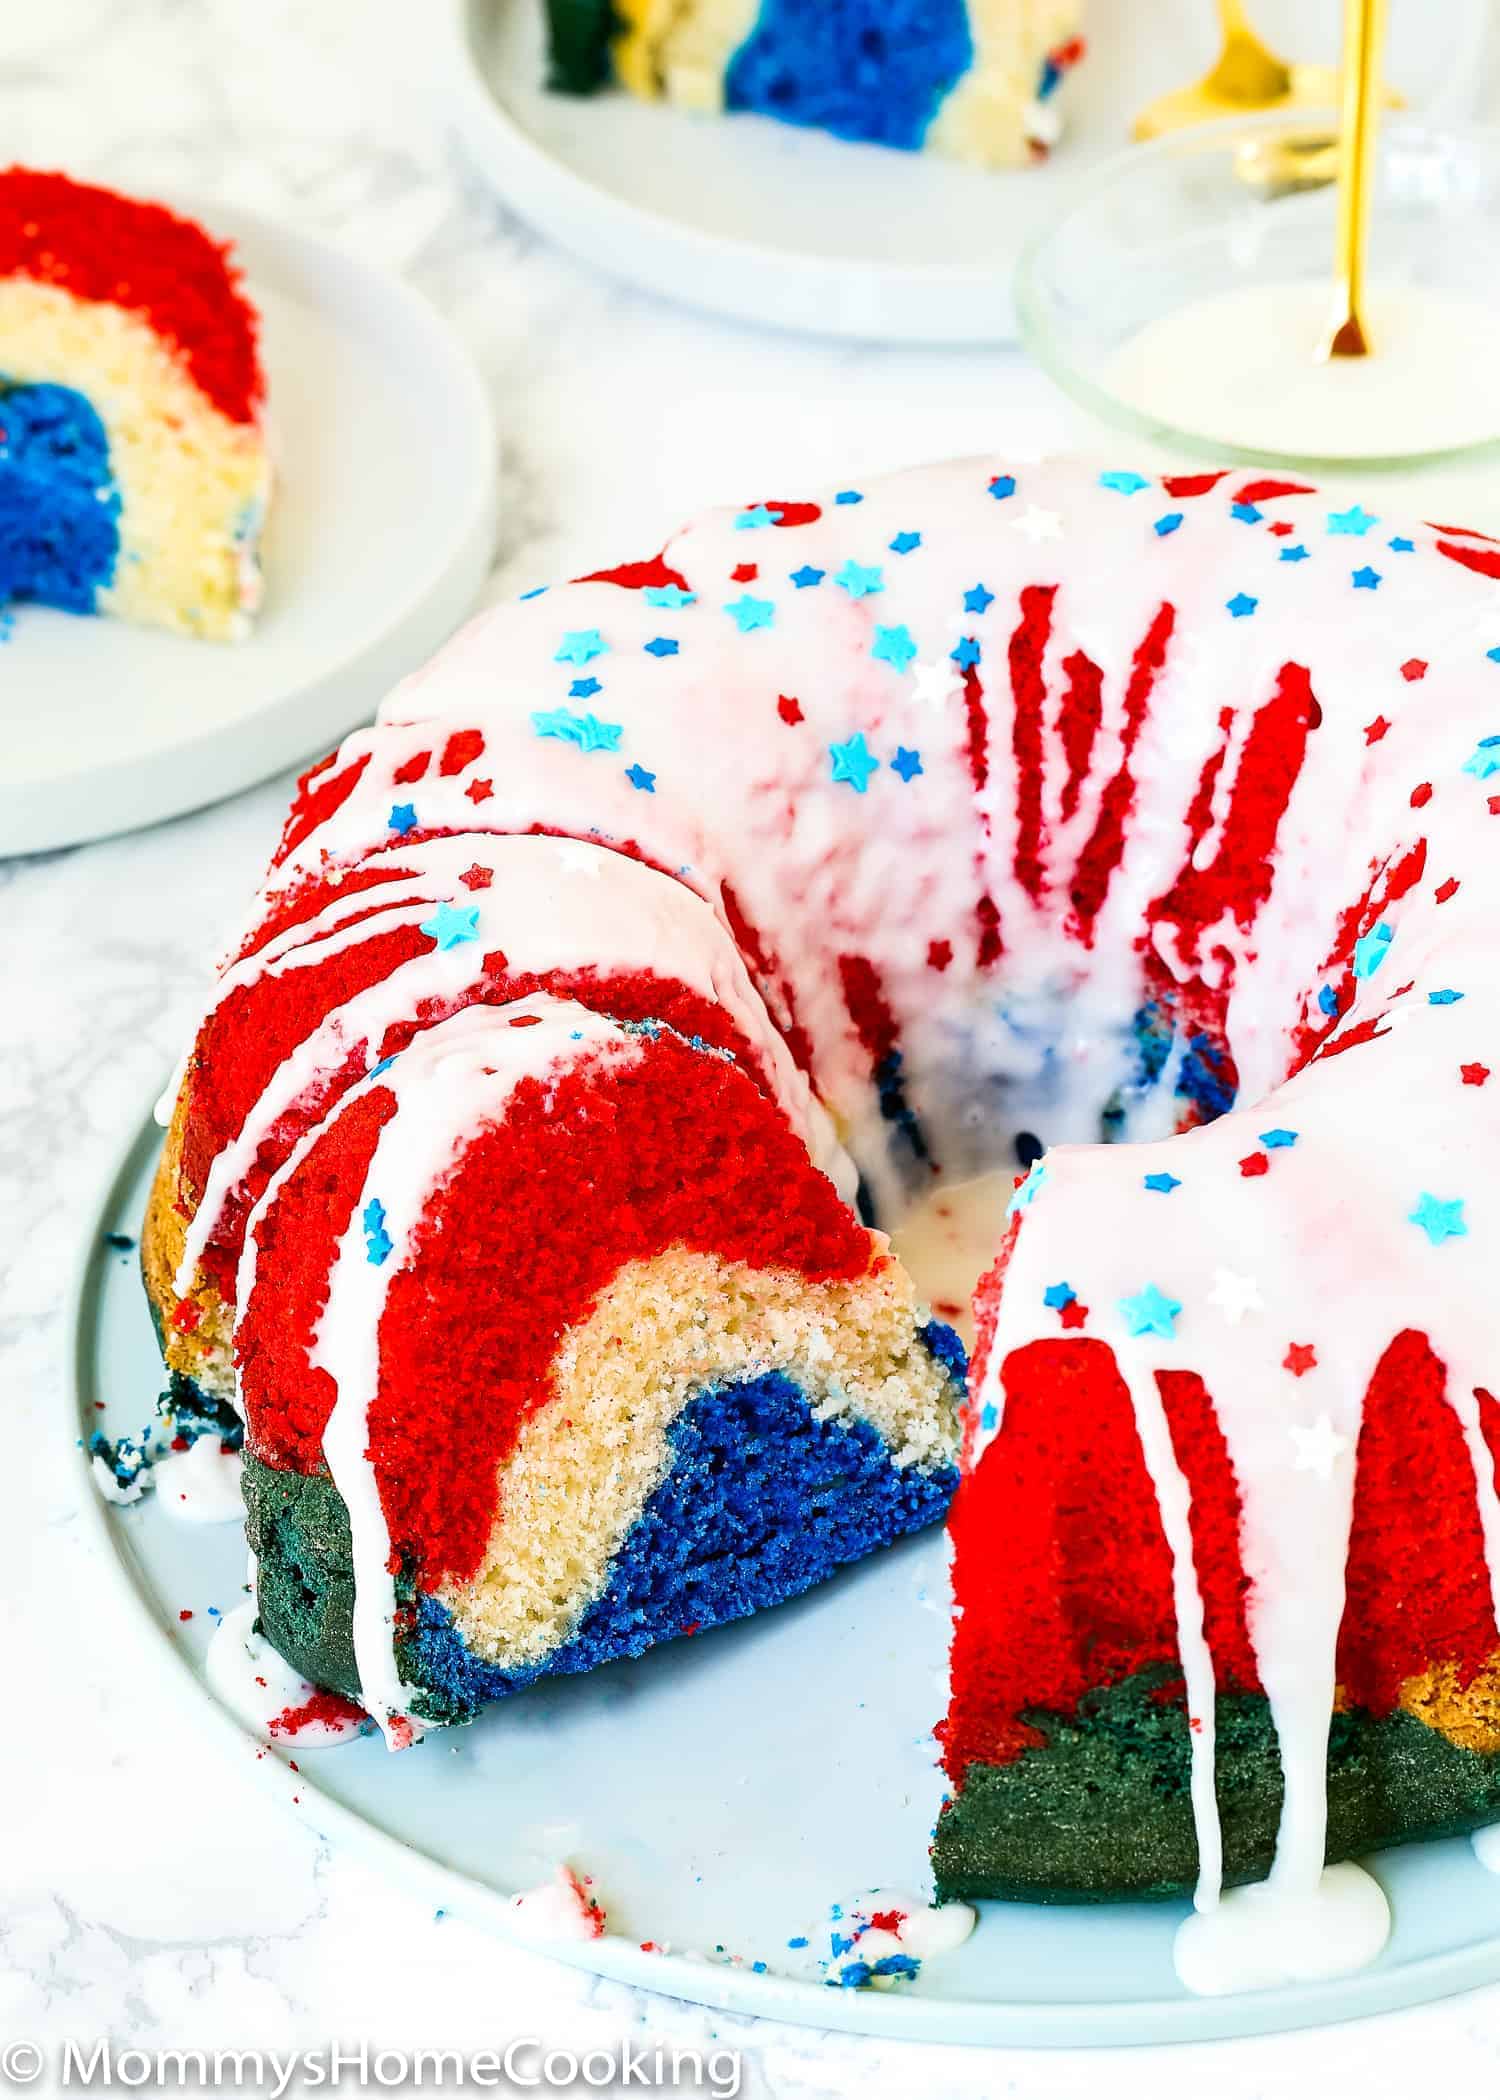 Red, White, and Blue Eggless Bundt Cake served on a plate.